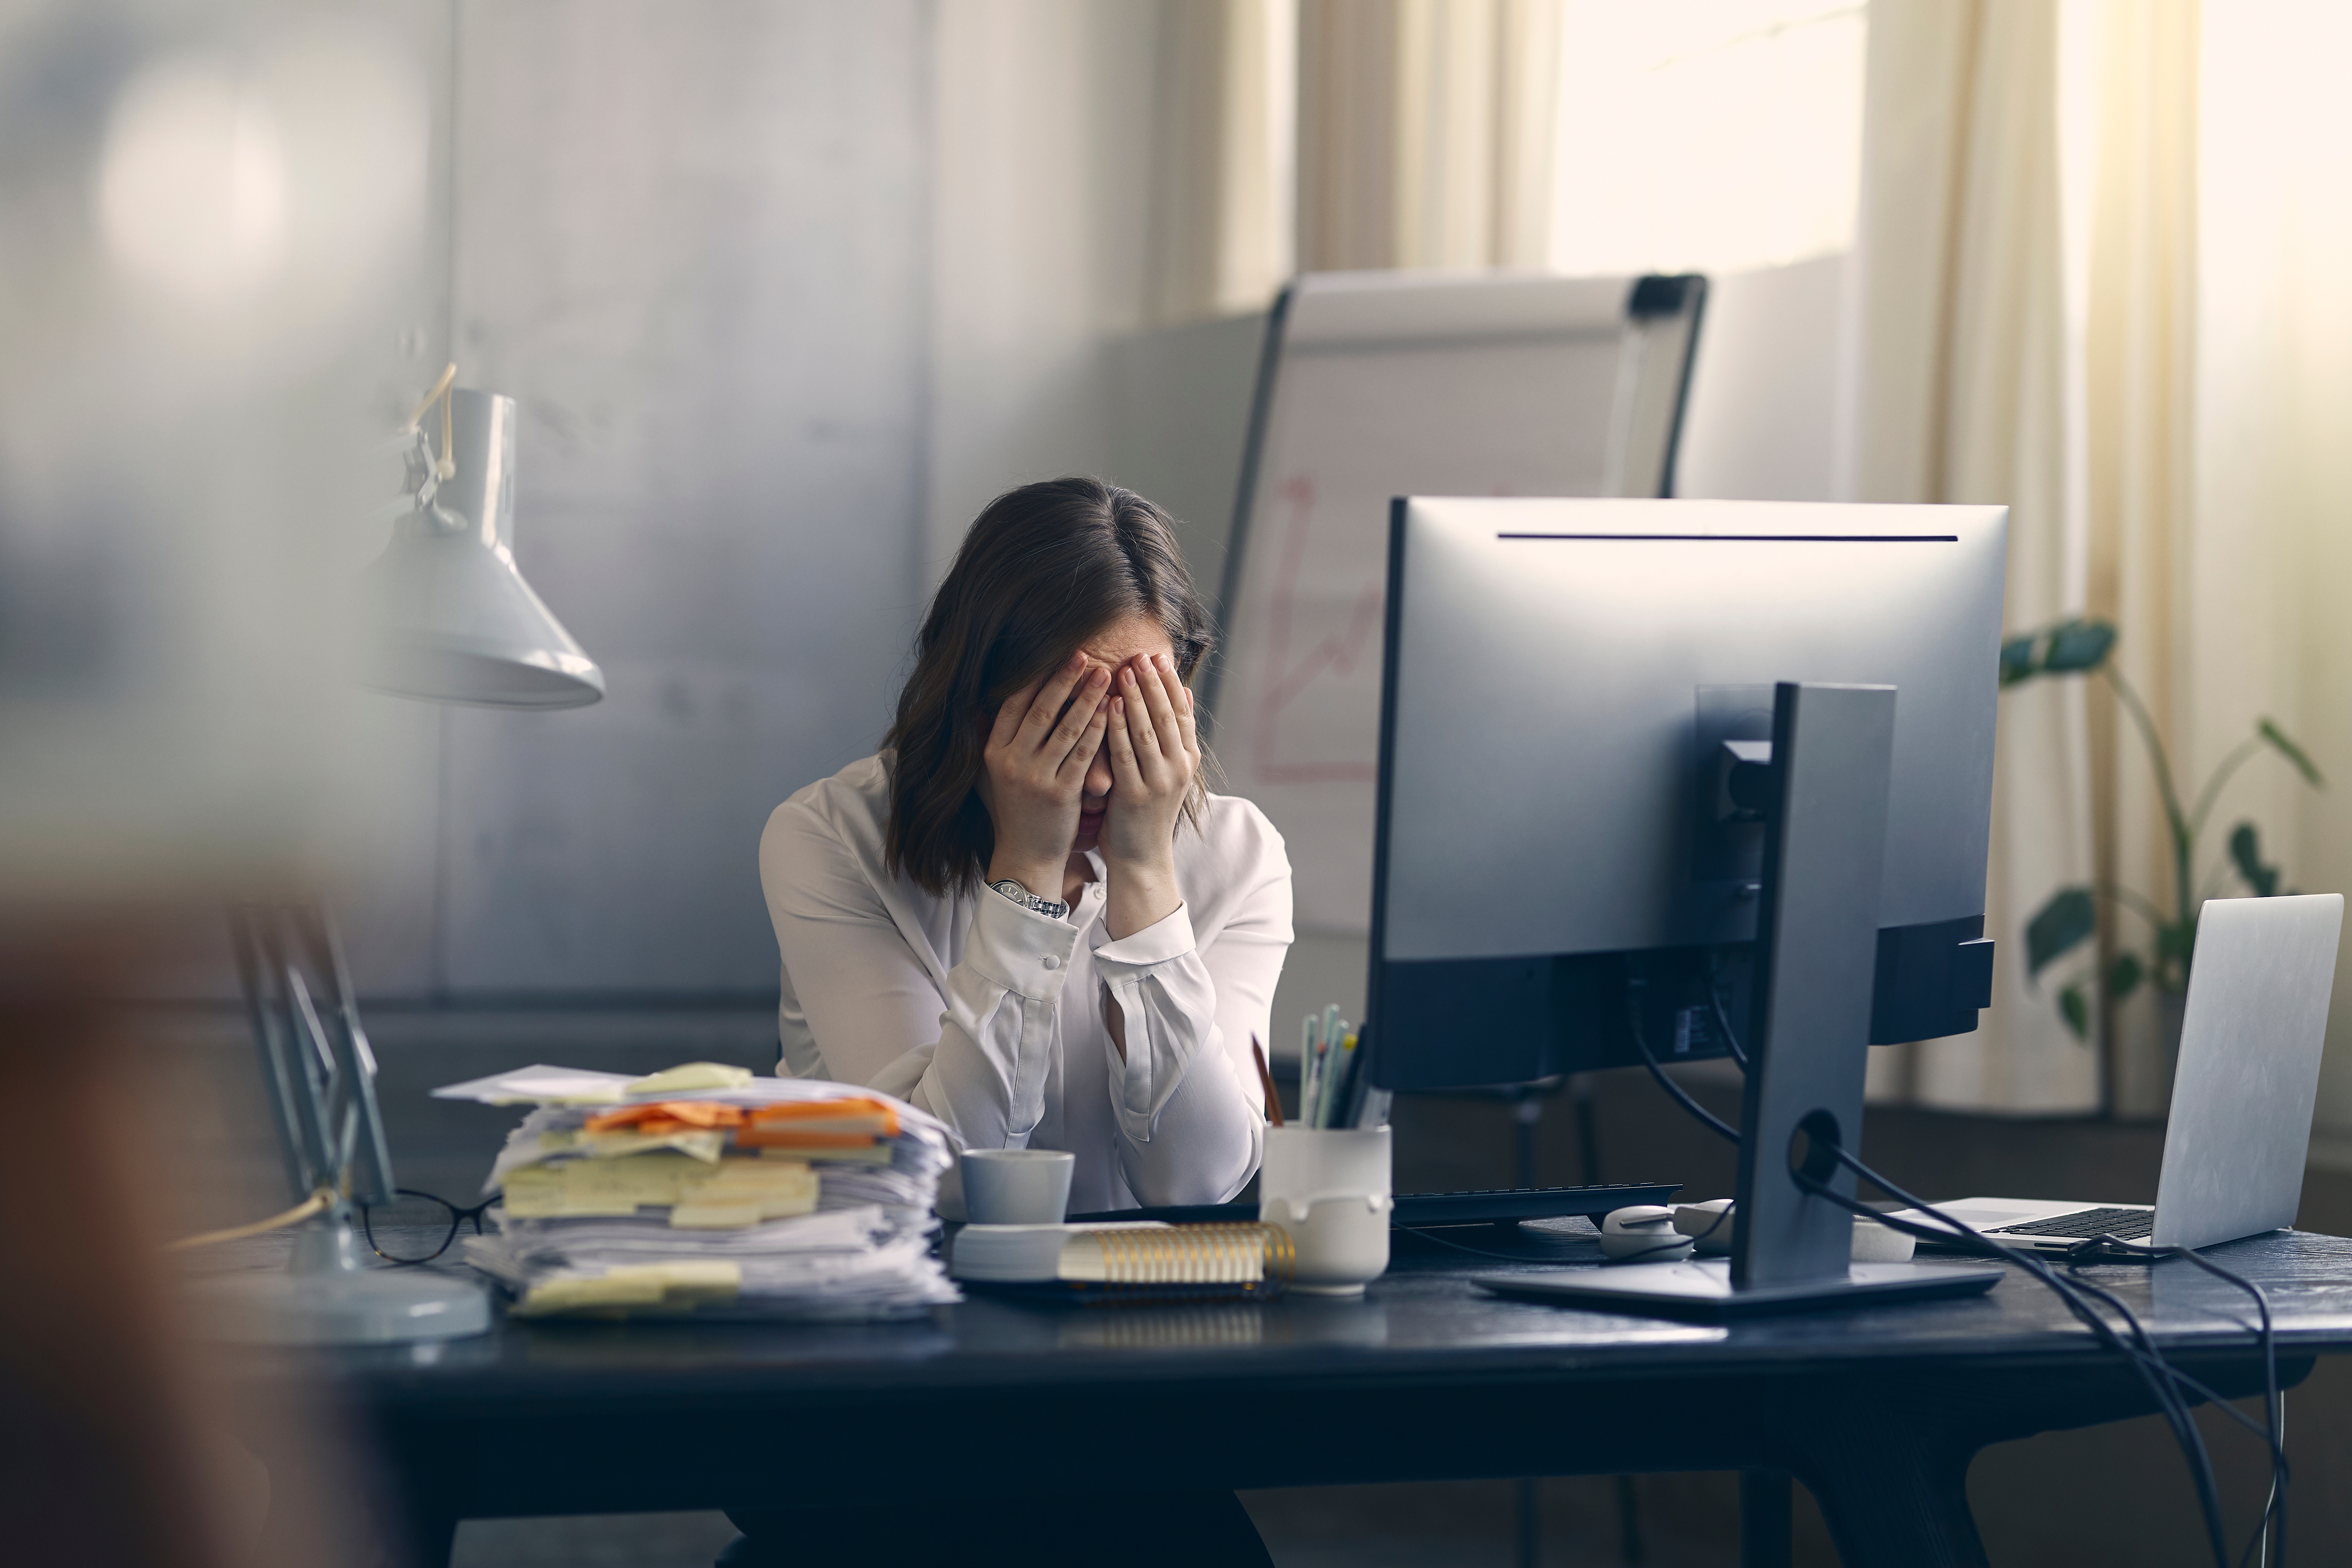 A stressed employee | Source: Shutterstock